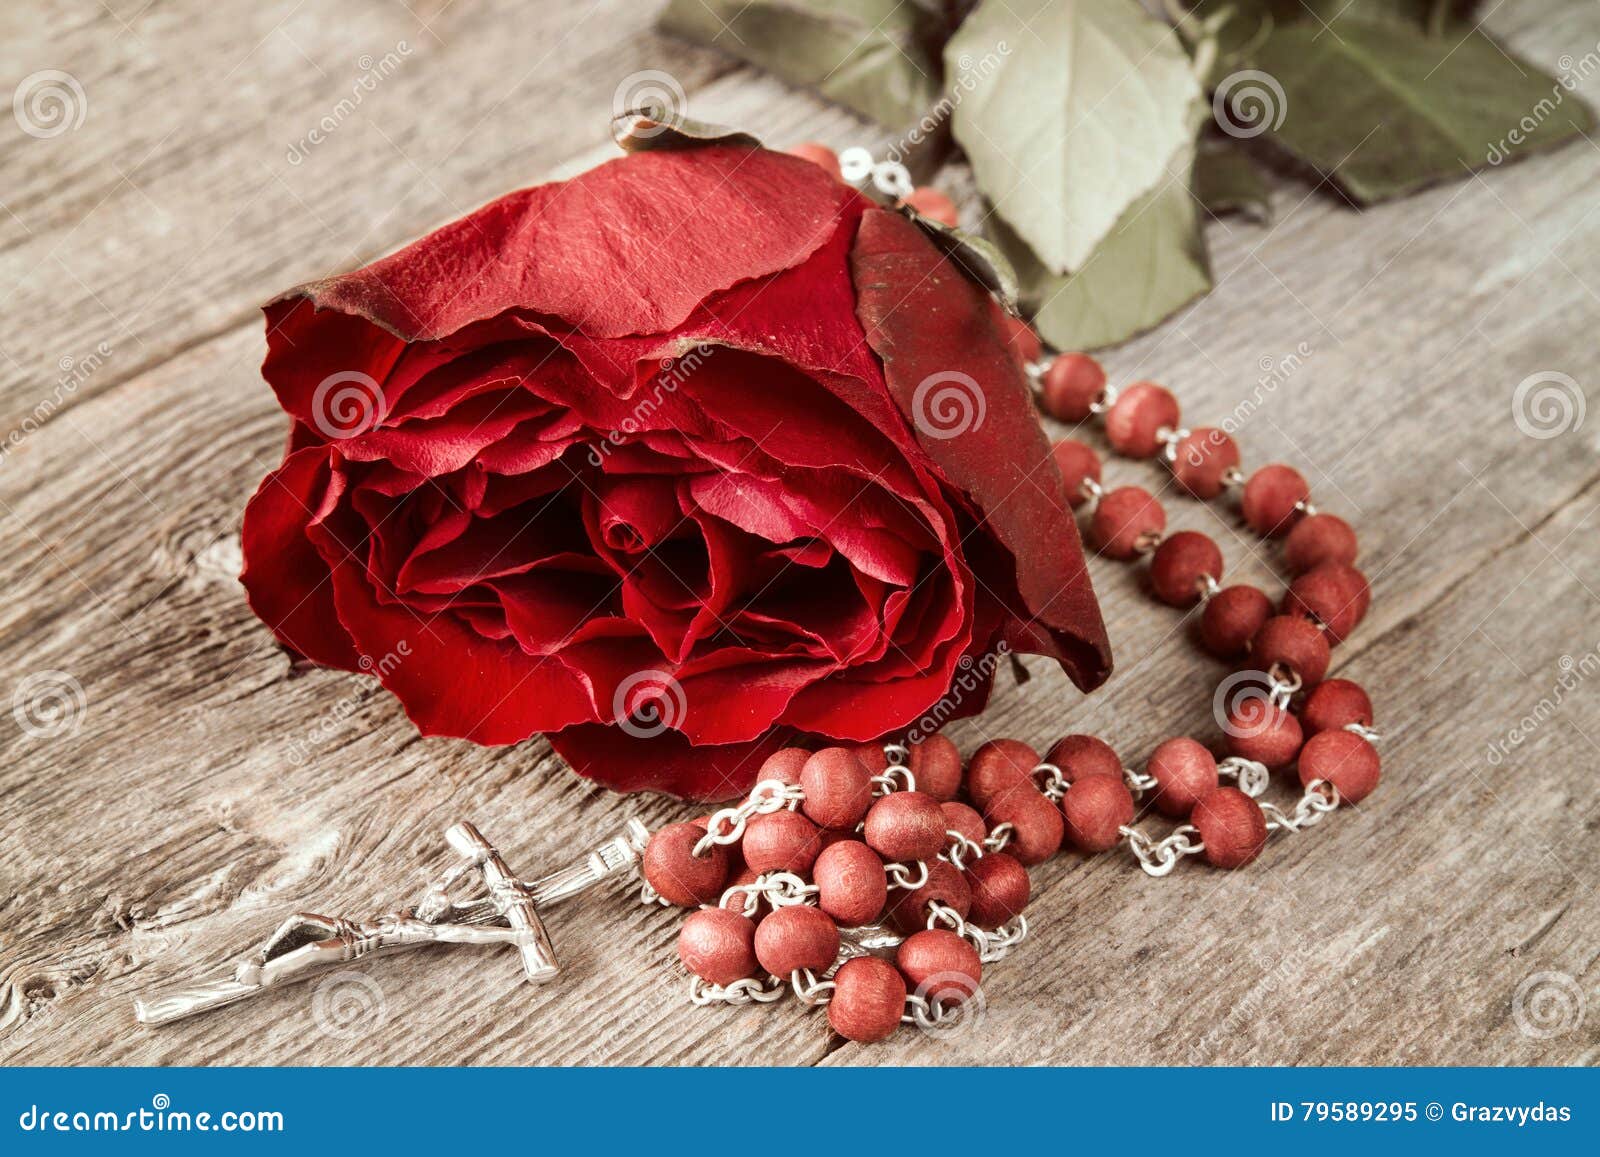 catholic rosary and red rose